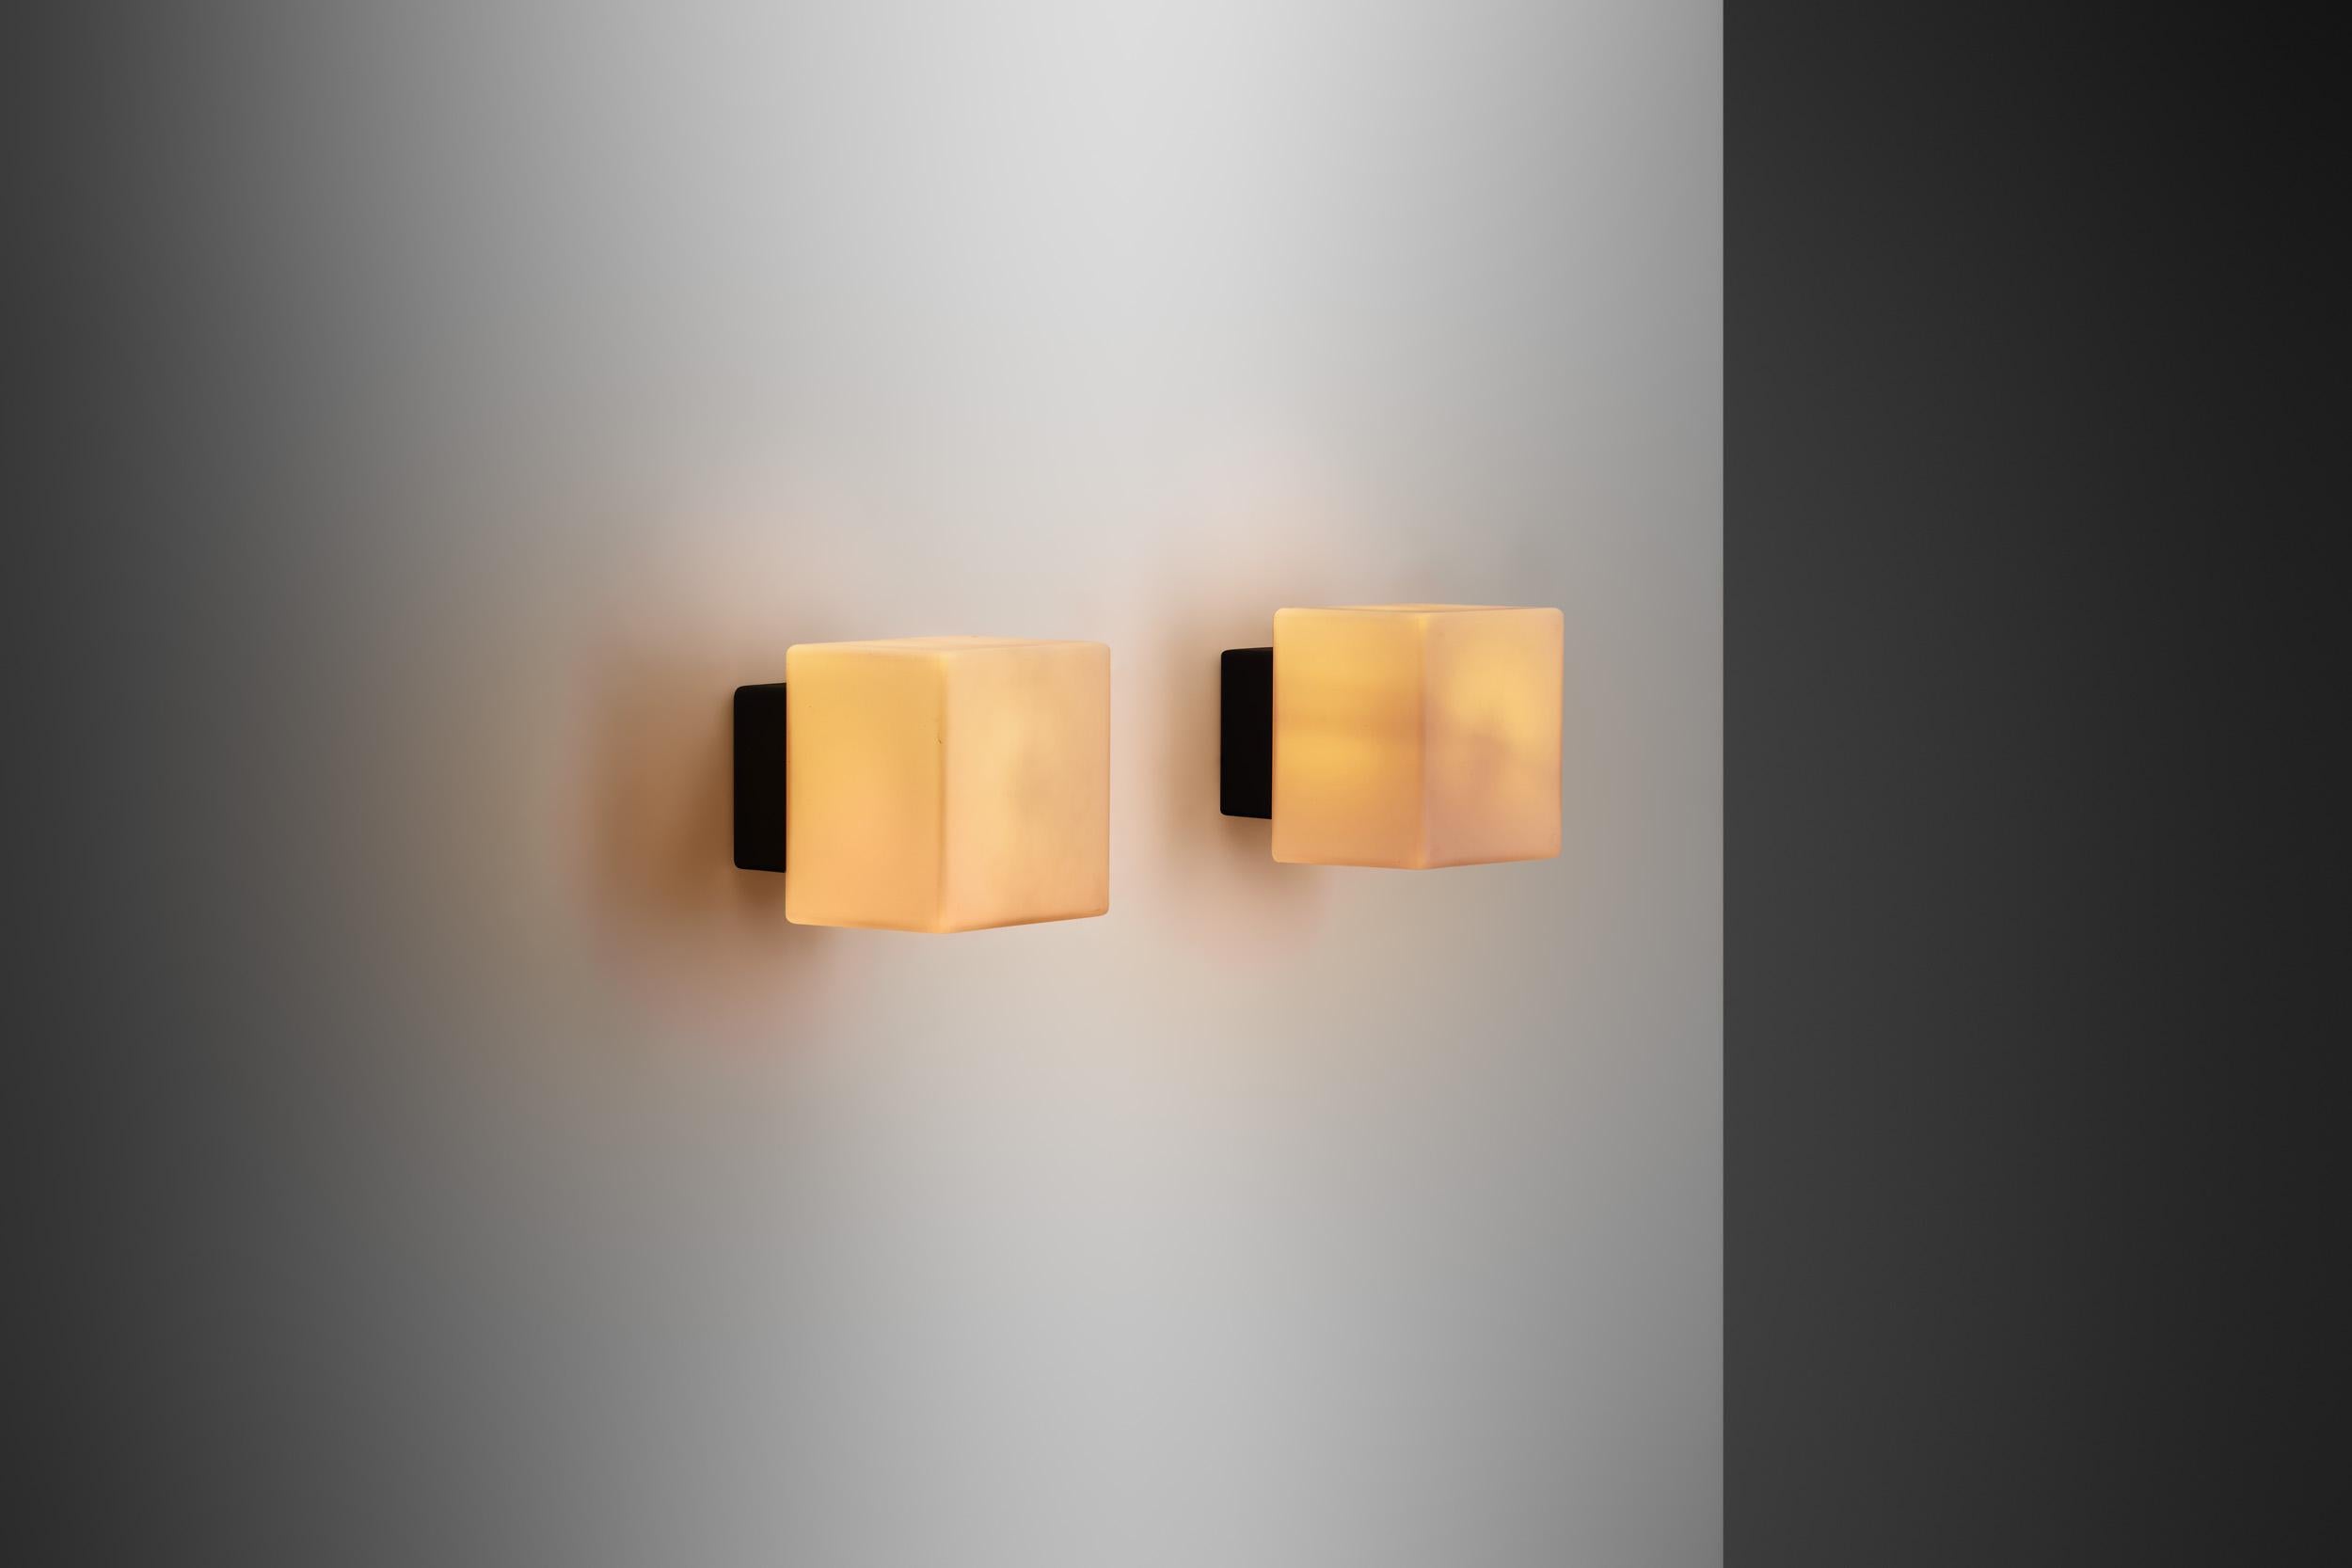 This pair of Louis Poulsen produced “Kubuarmatur” or cube lamps, more specifically known as “model 38117” wall lamps are quintessential representations of Danish modern design, characterized by simplicity, functionality, and a distinct minimalist